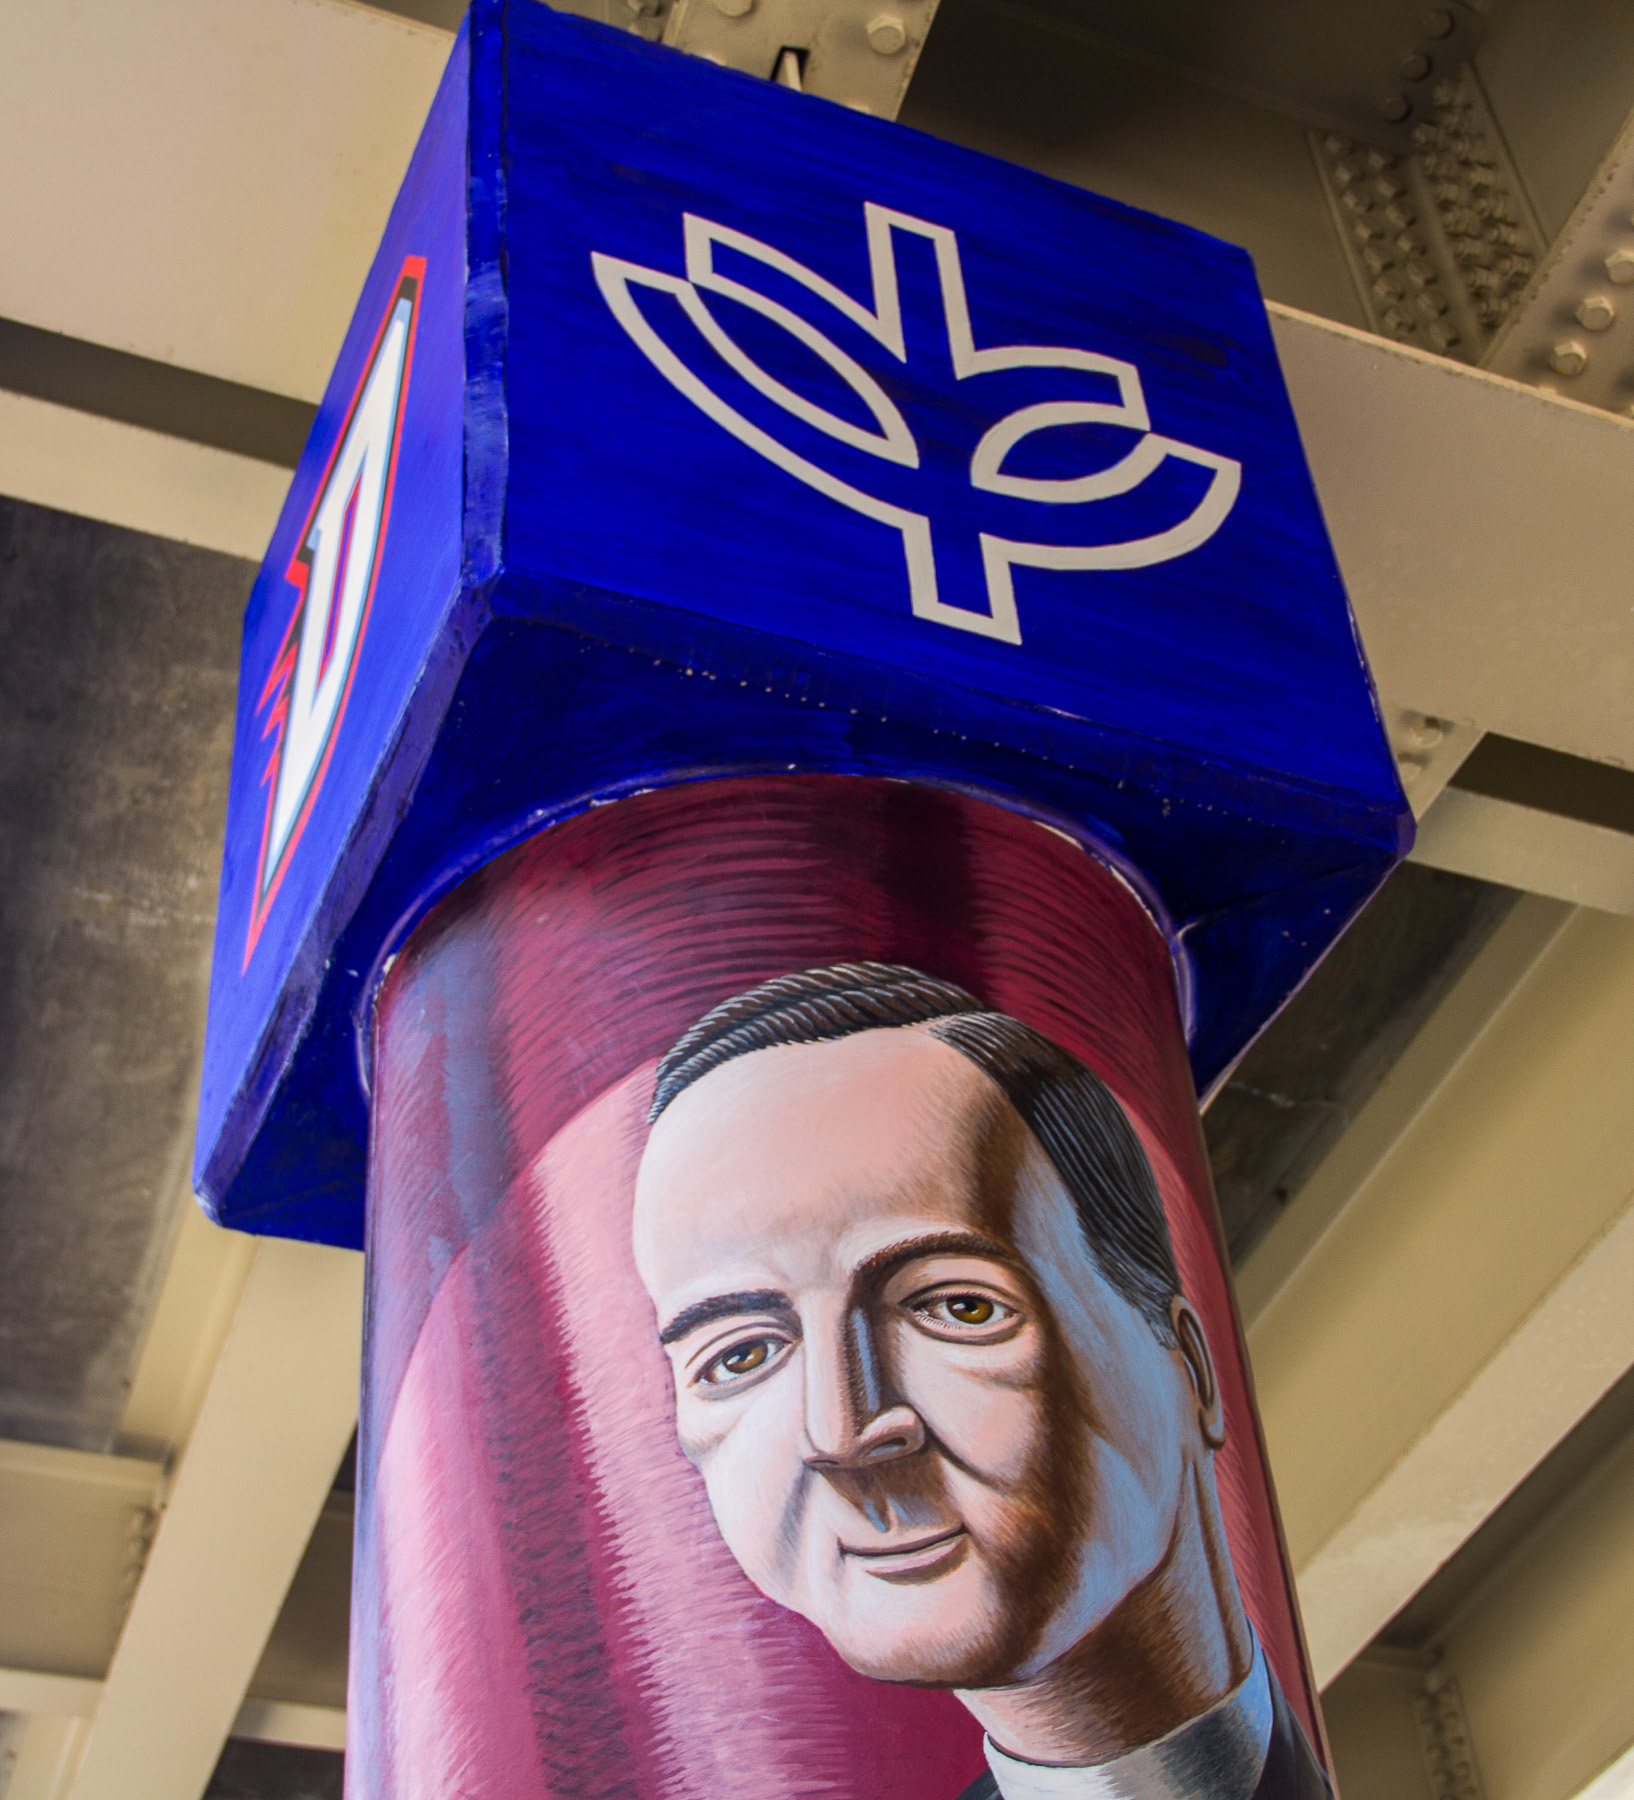 The Rev. Francis Xavier McCabe, C.M., DePaul's second president, who kept the university open during World War I is featured on one of the new pillars located under Fullerton 'L' tracks, part of the public art project, "The Story of the Little School Under the 'L'" project began in 2016 by Brother Mark Elder, C.M.  (DePaul University/Russell Dorn)